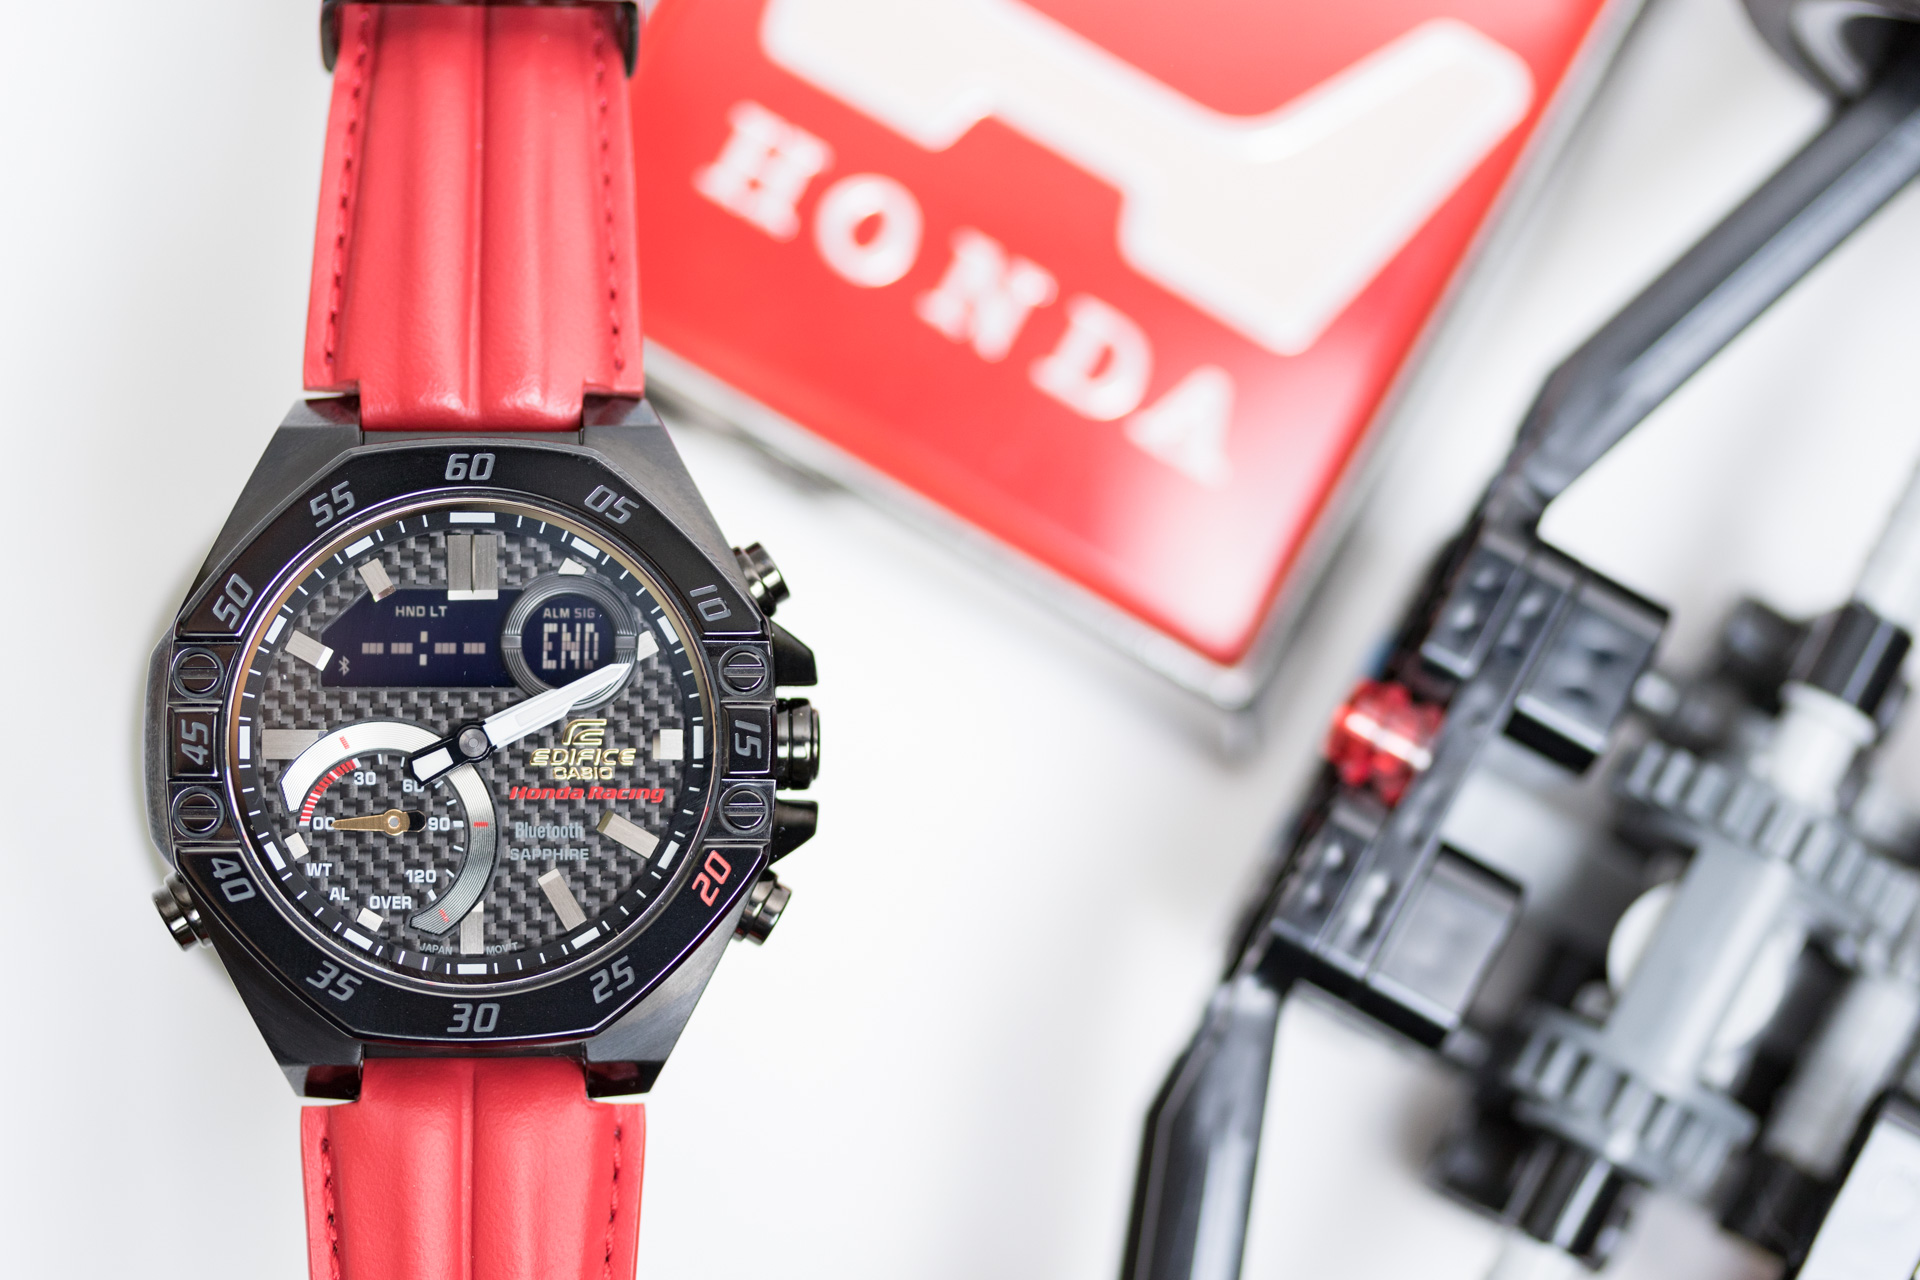 Watch Review: Casio Edifice Honda Racing Limited Edition